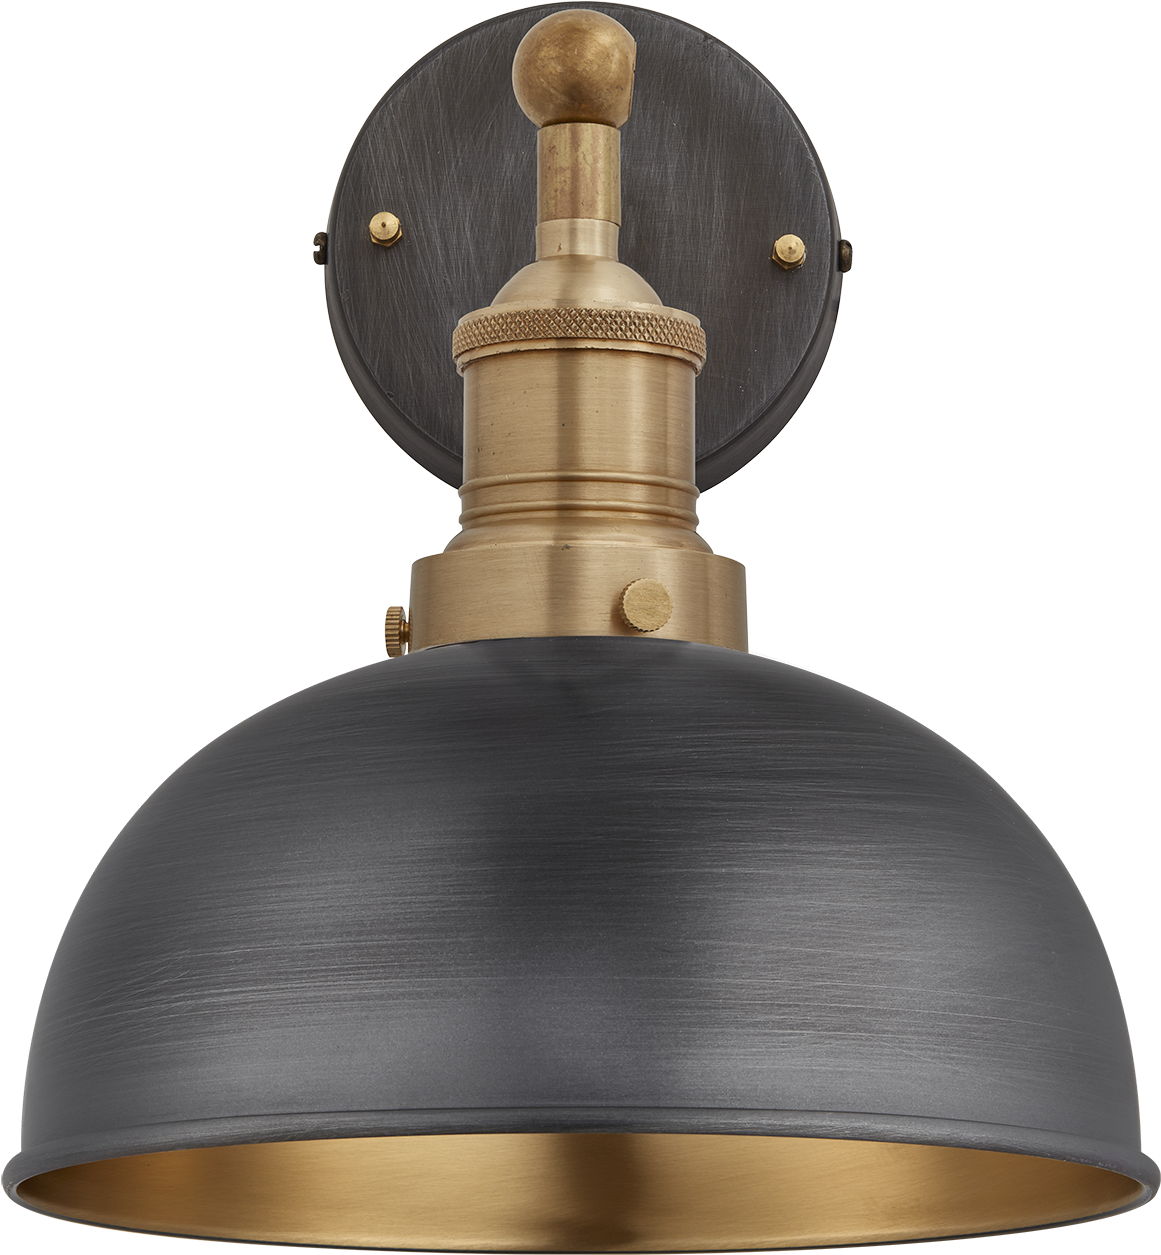 Wall Lamp PNG Image High Quality PNG Image